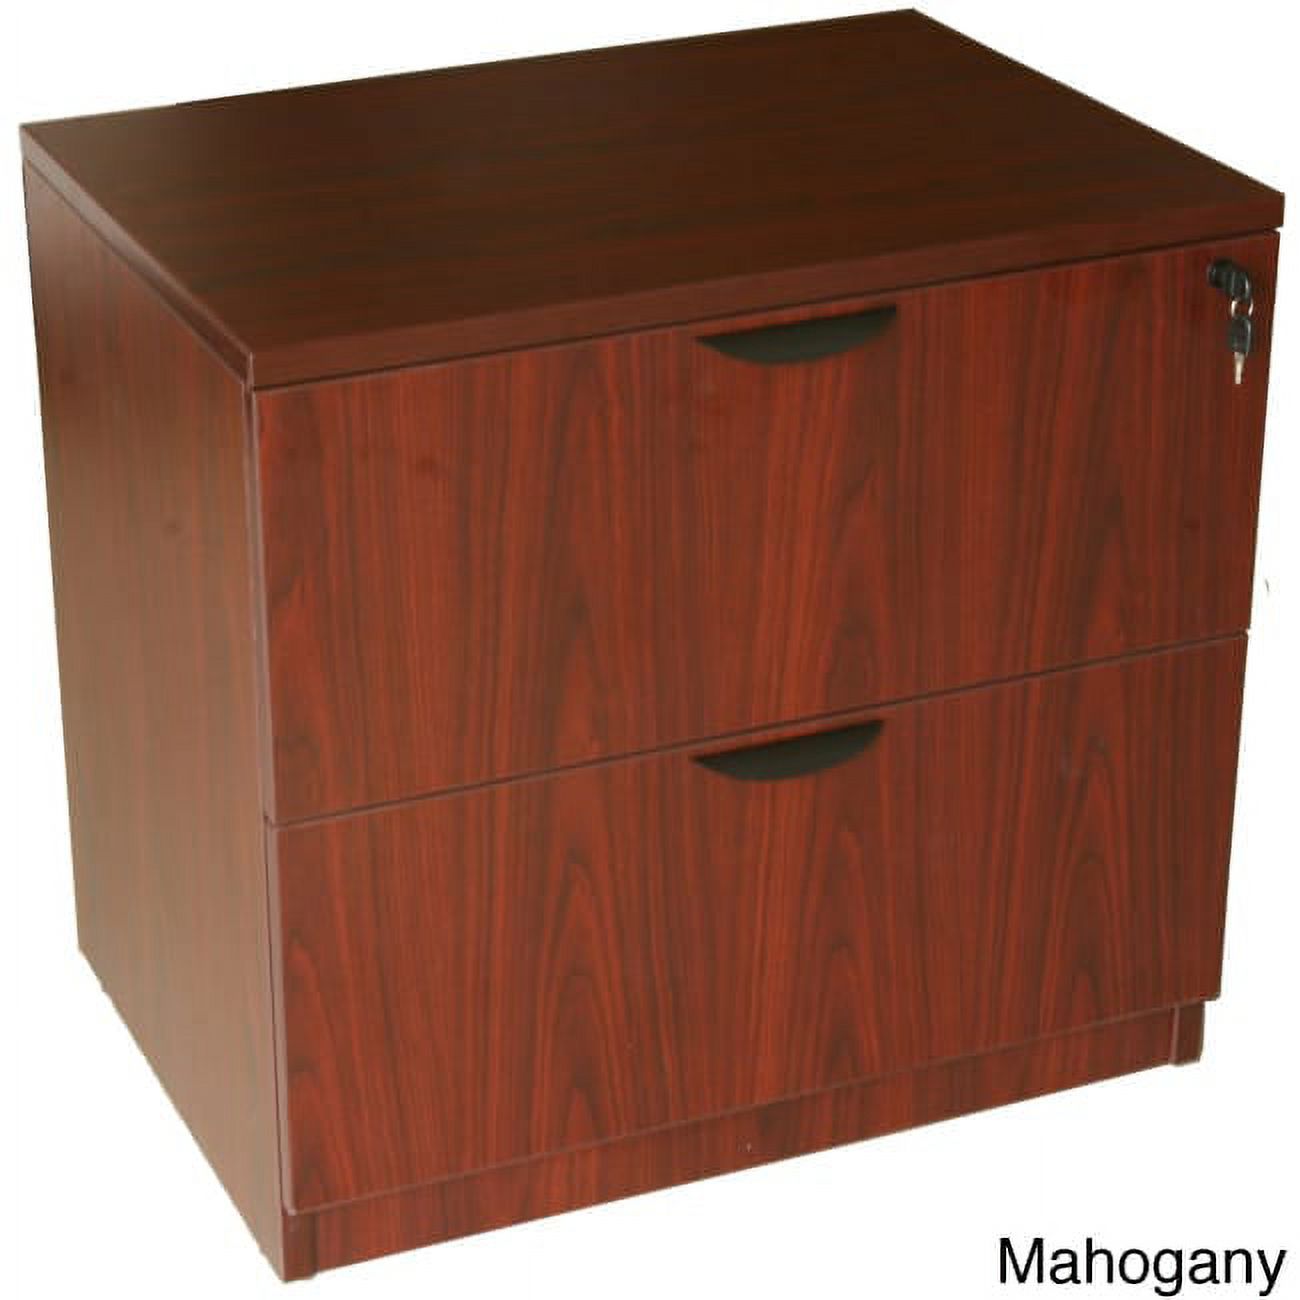 Boss N112-C 2-drawer Lateral File - Cherry - image 2 of 4